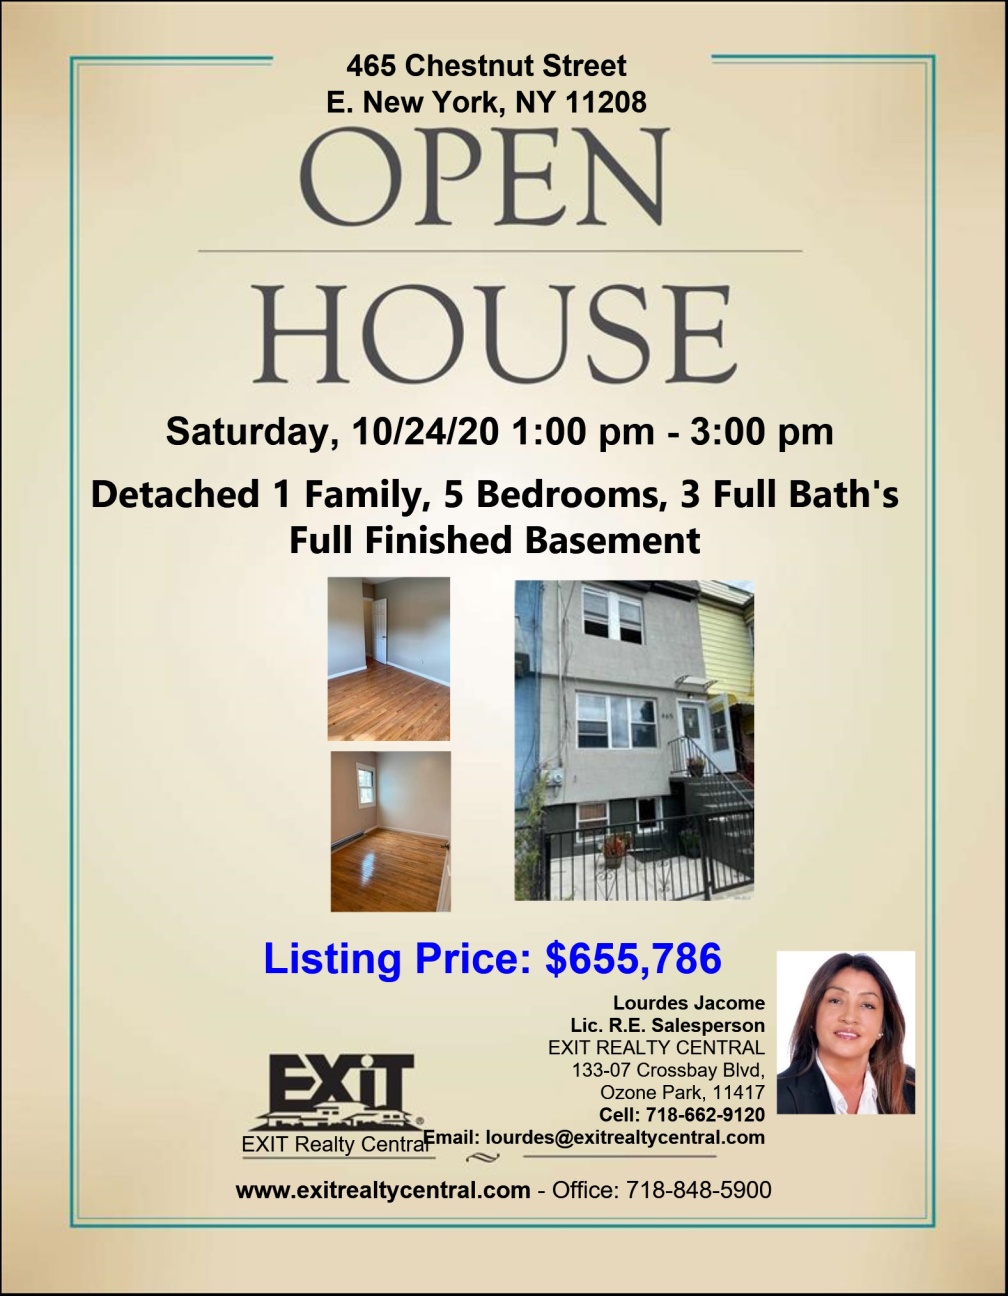 Open House in E. New York 10/24 1-3pm